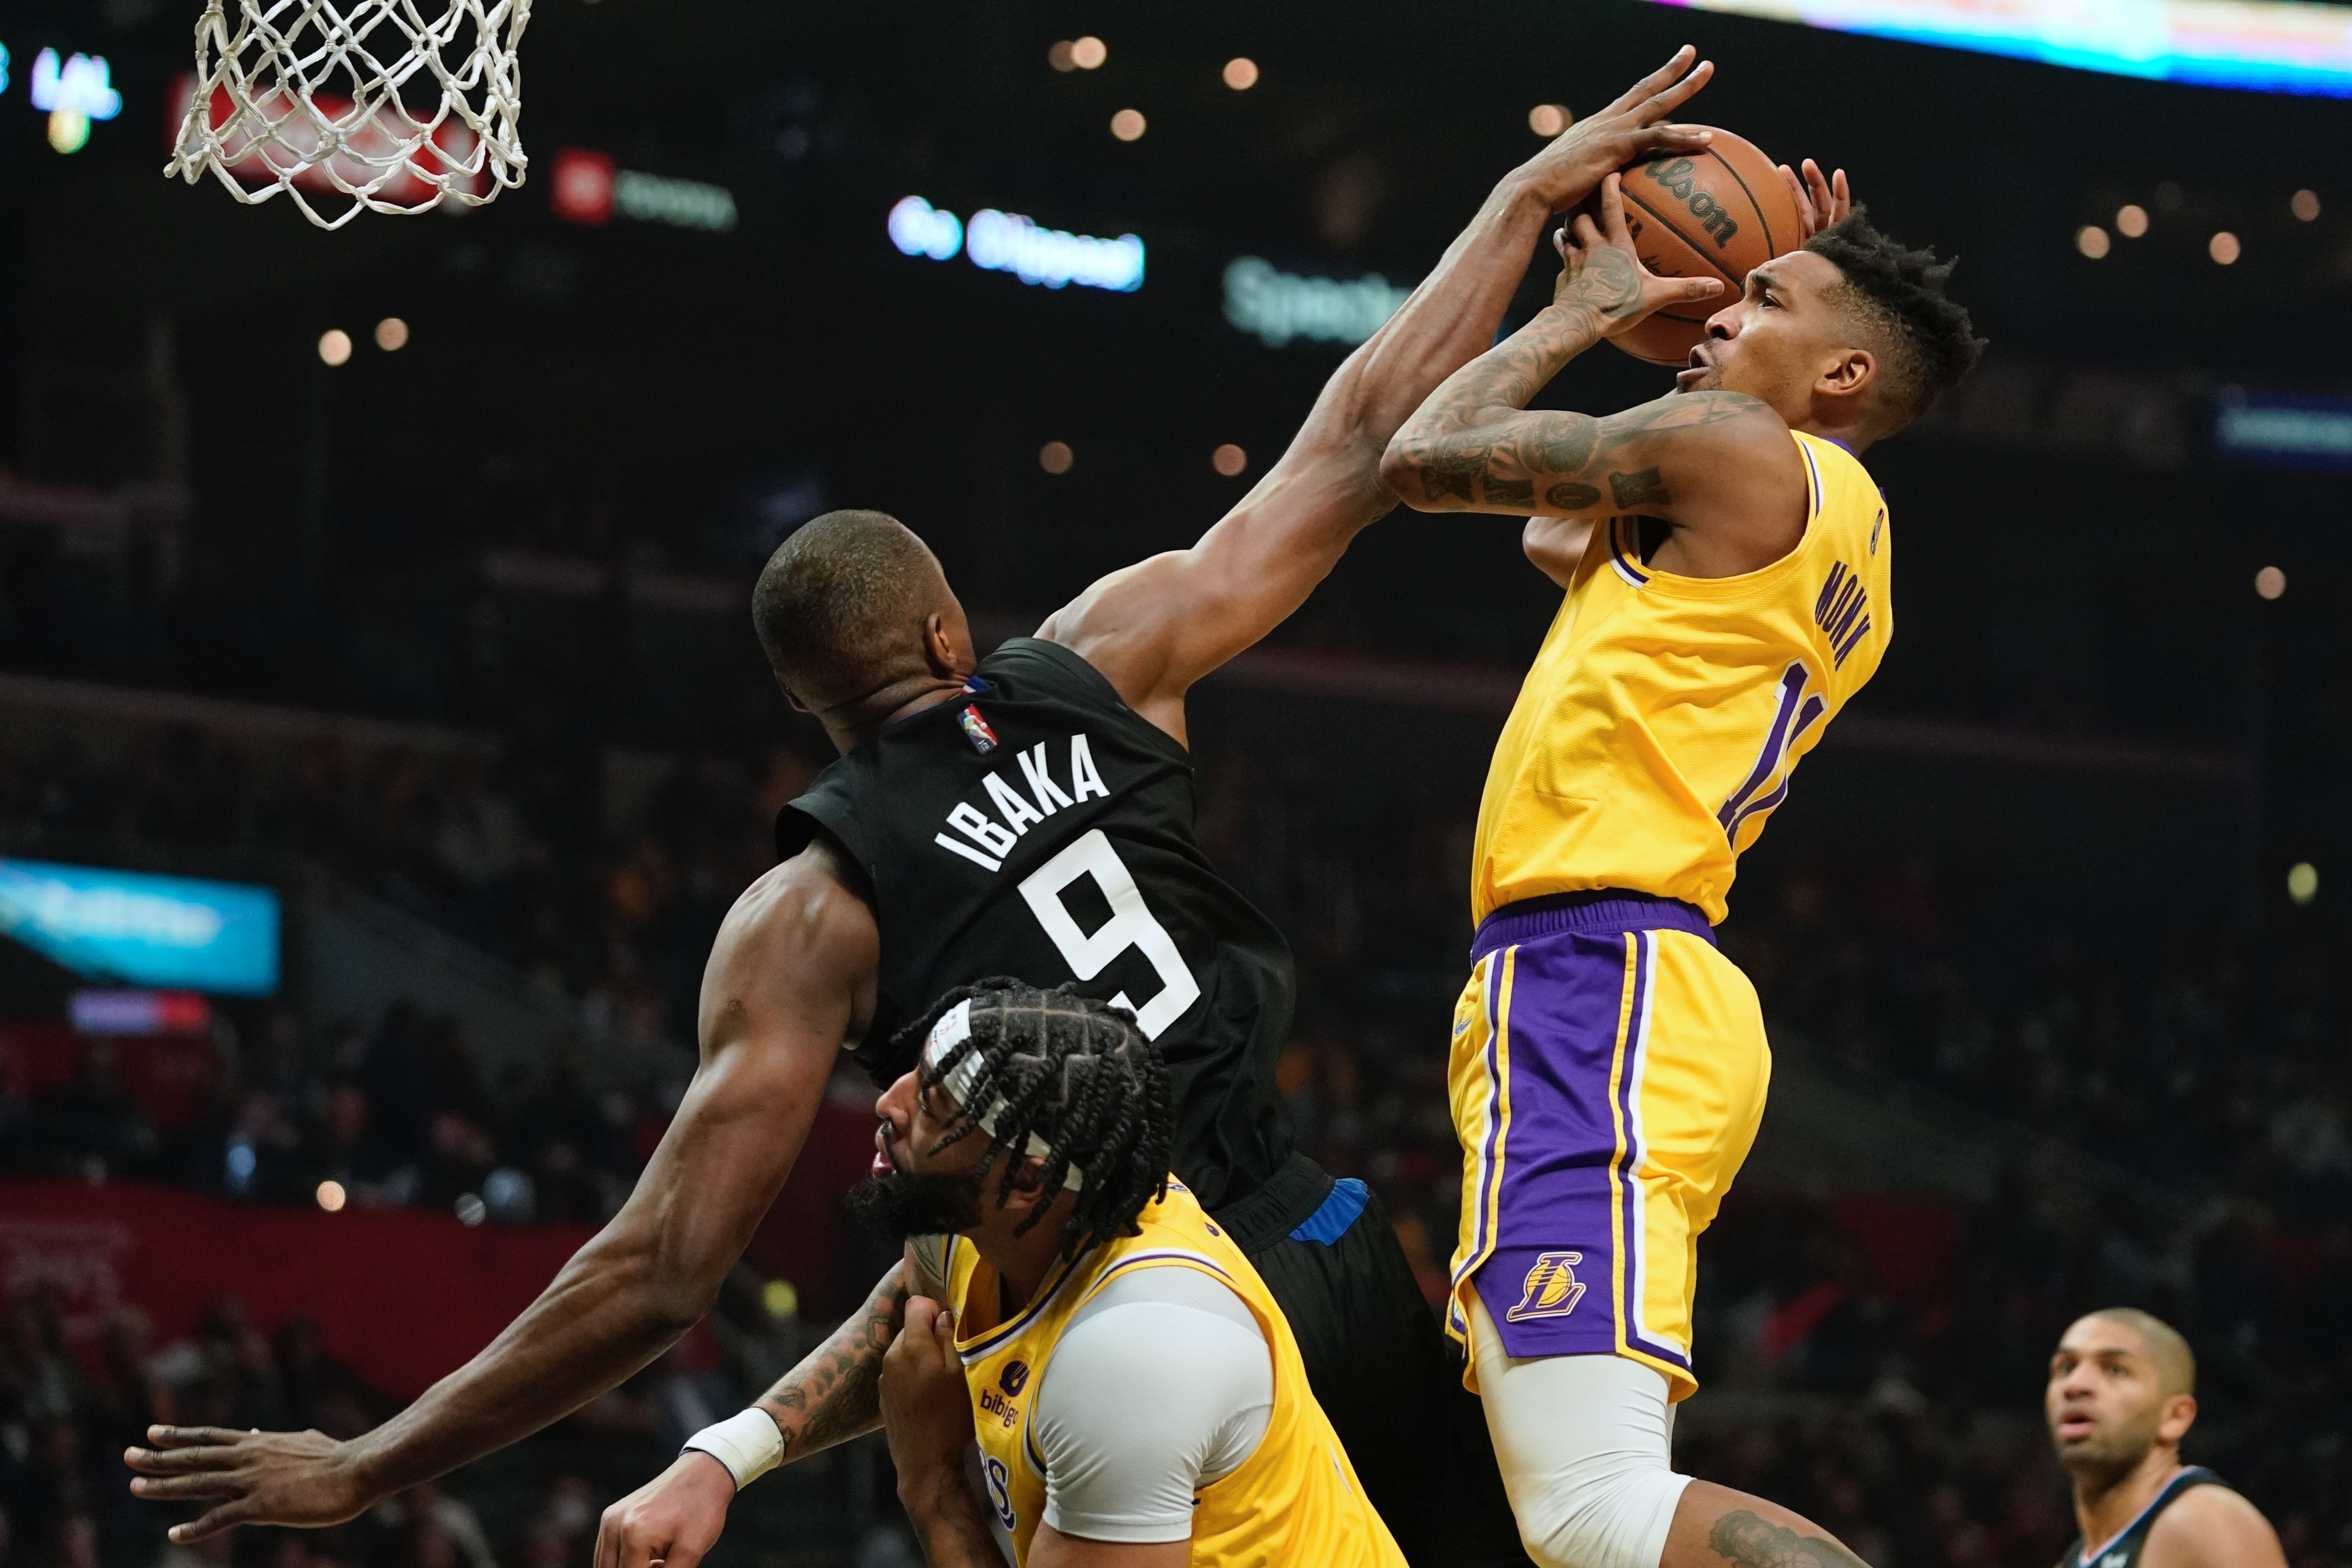 Lakers clippers betting live betting scores